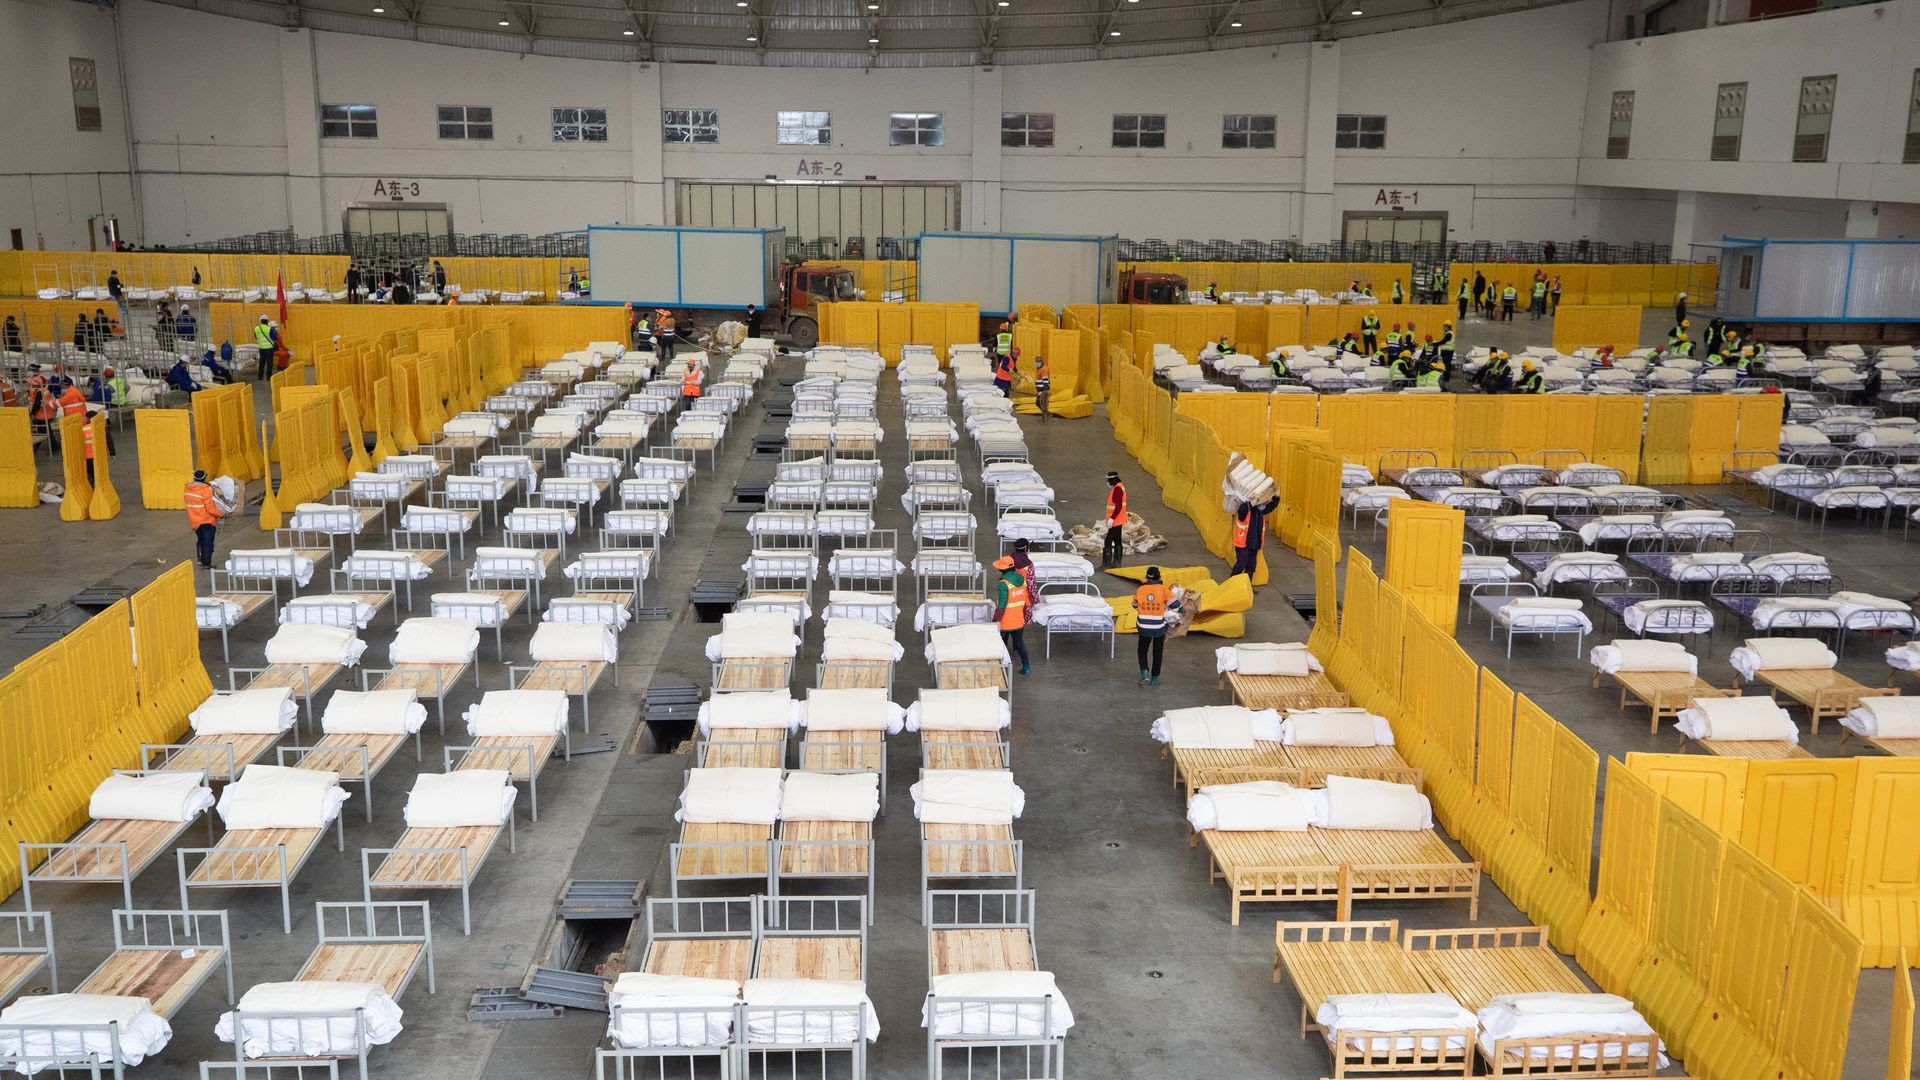 In February, with cases rising rapidly, workers set up a makeshift hospital in a Wuhan exhibition center. Photo: Costfoto/Barcroft Media via Getty Images